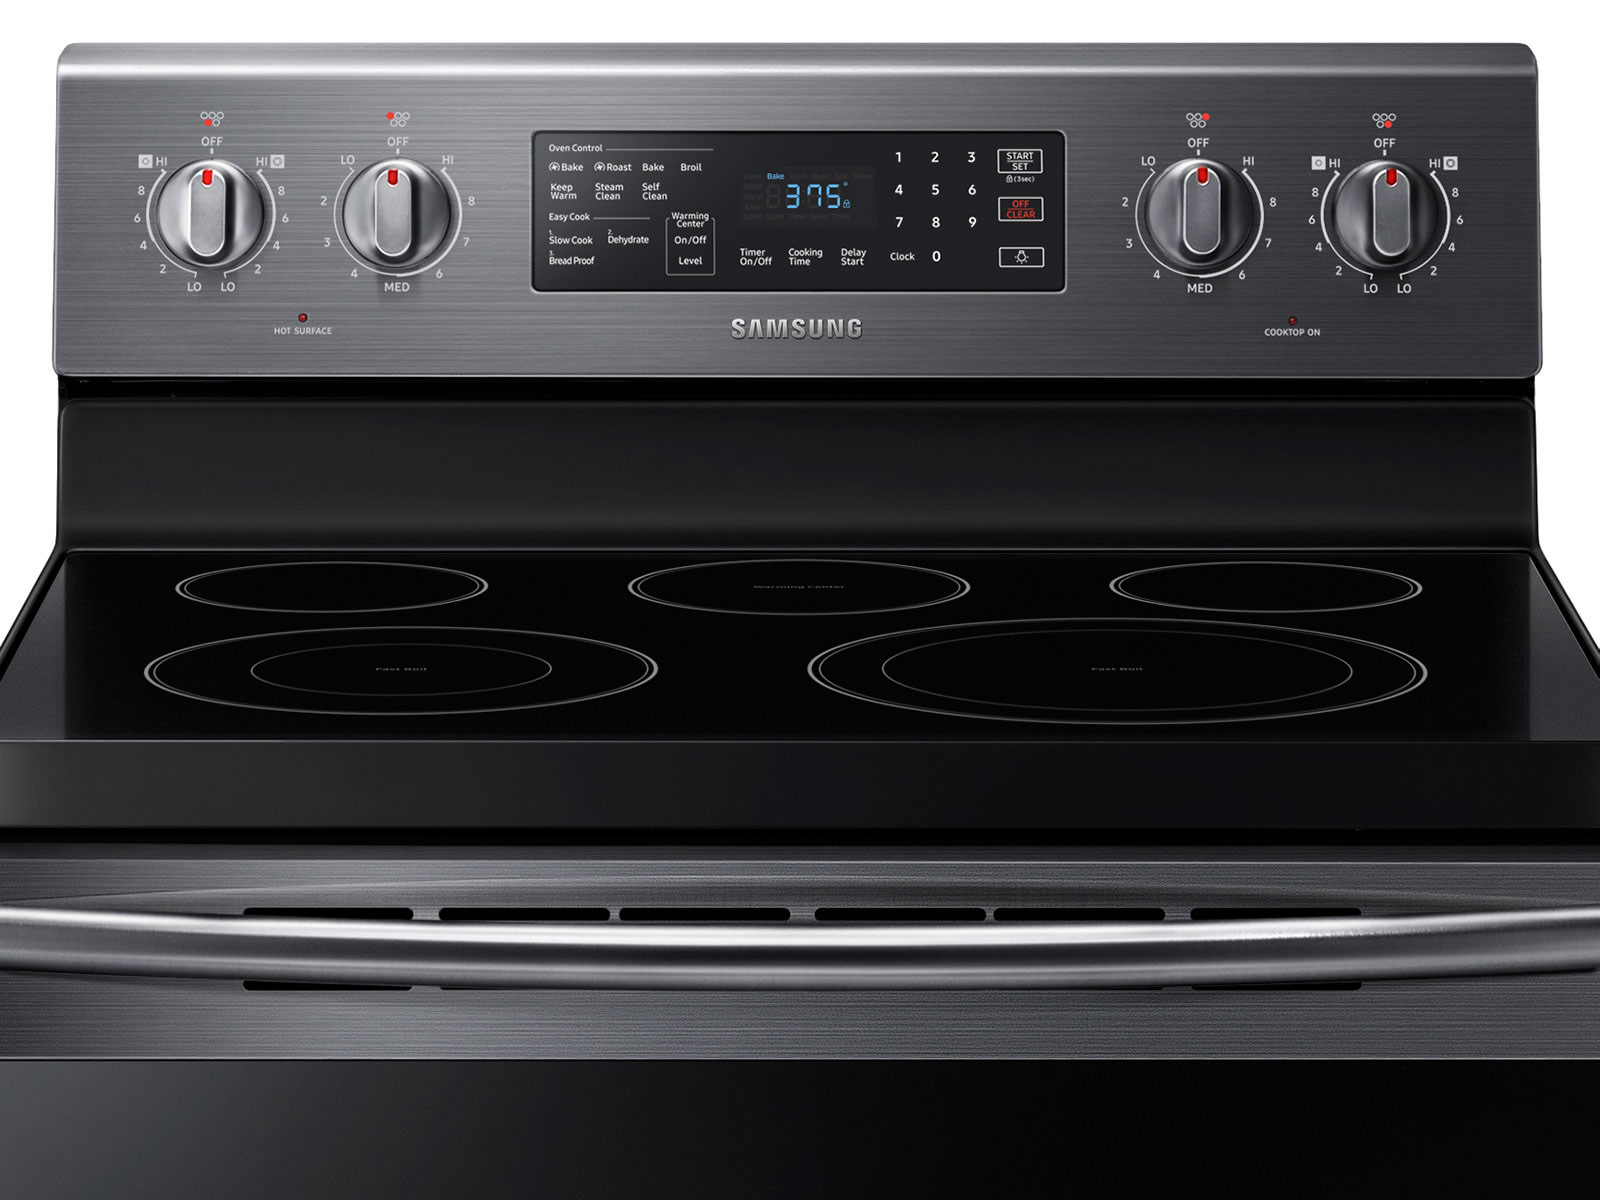 5.9 cu. ft. Freestanding Electric Range with Convection in Stainless Steel  Range - NE59R4321SS/AA